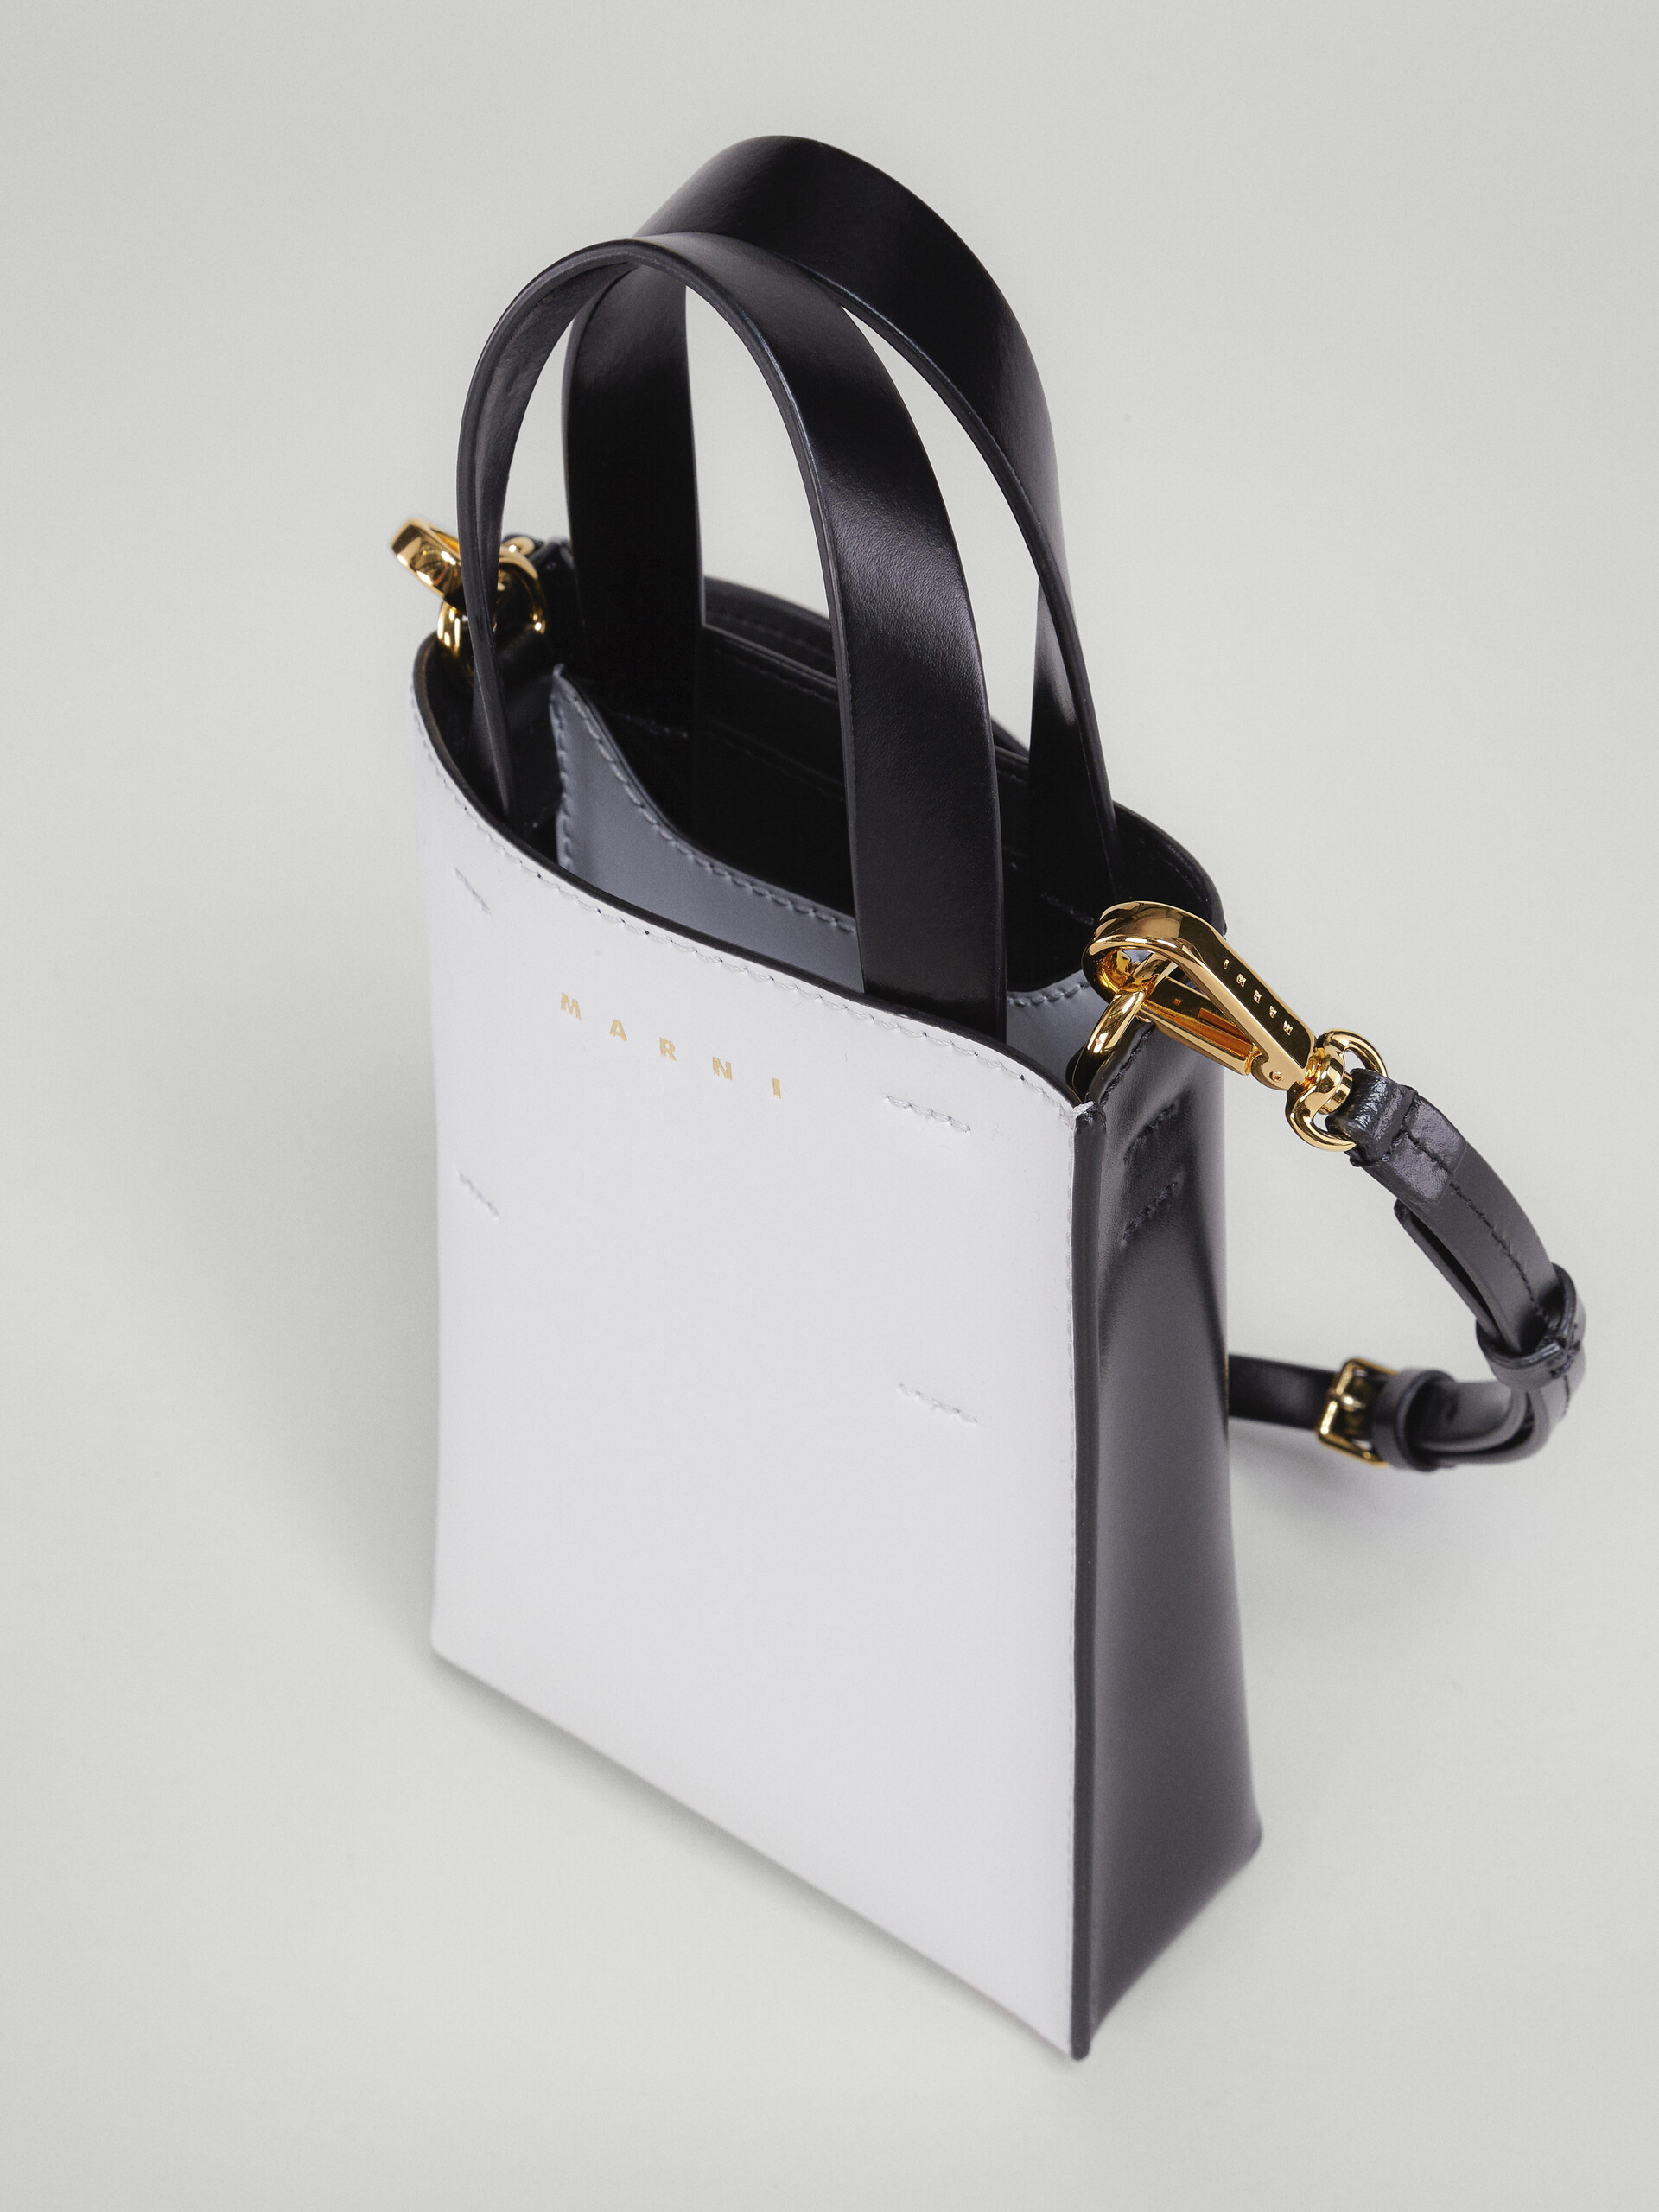 MUSEO nano bag in black shiny leather - Shopping Bags - Image 4